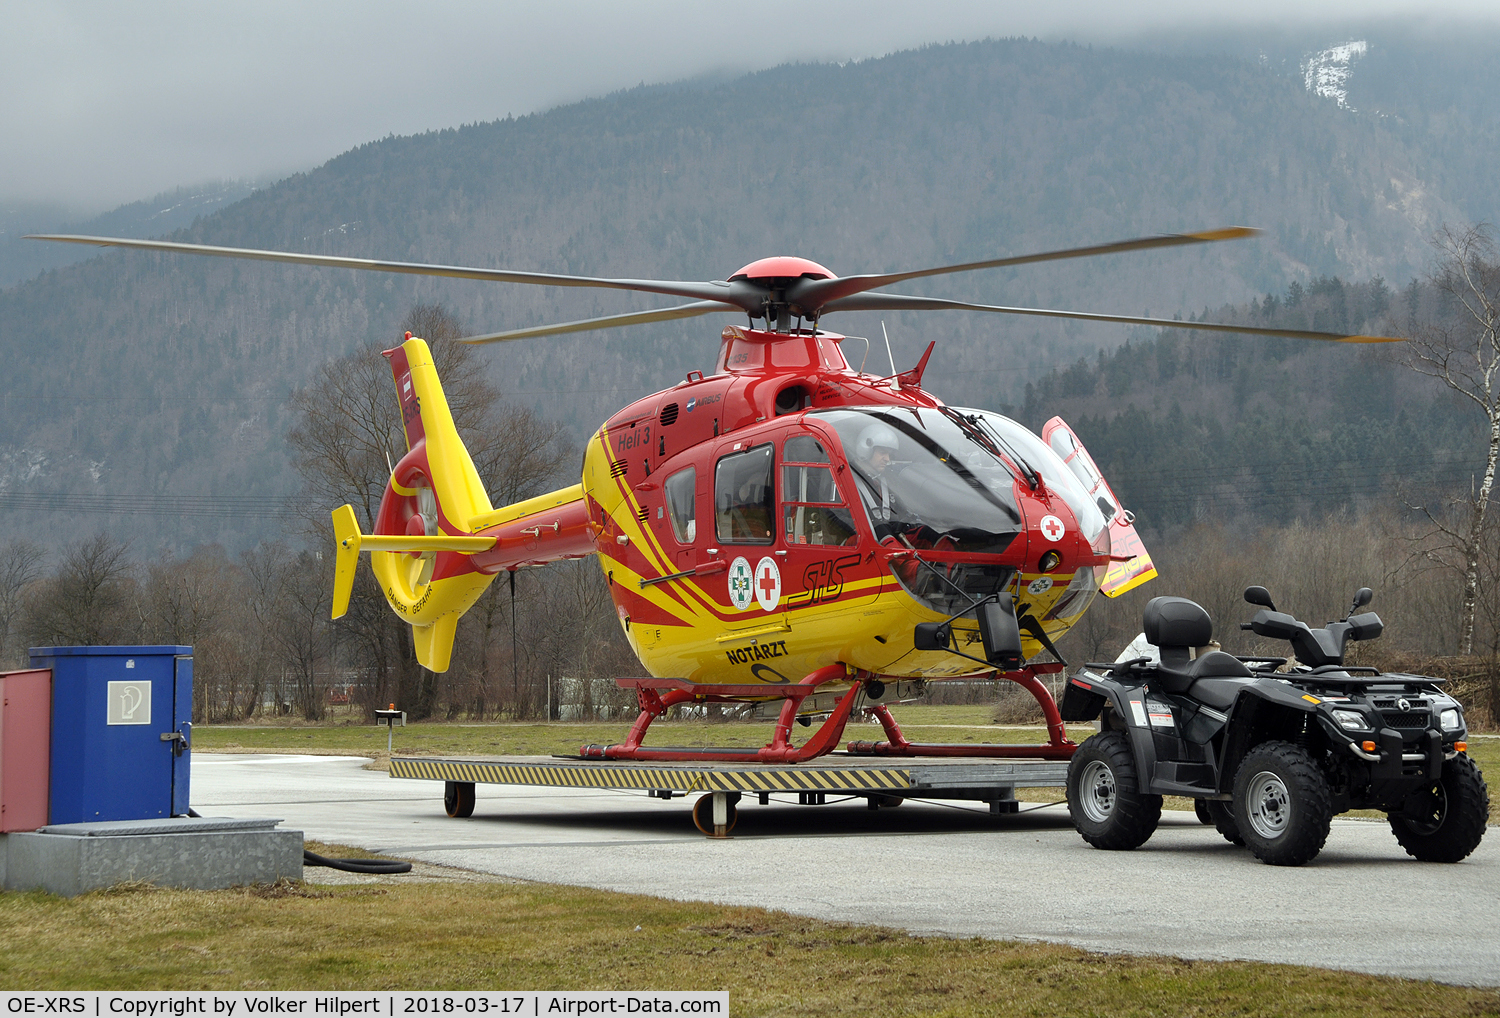 OE-XRS, 1998 Eurocopter EC-135T-1 C/N 0050, at Stimmersee